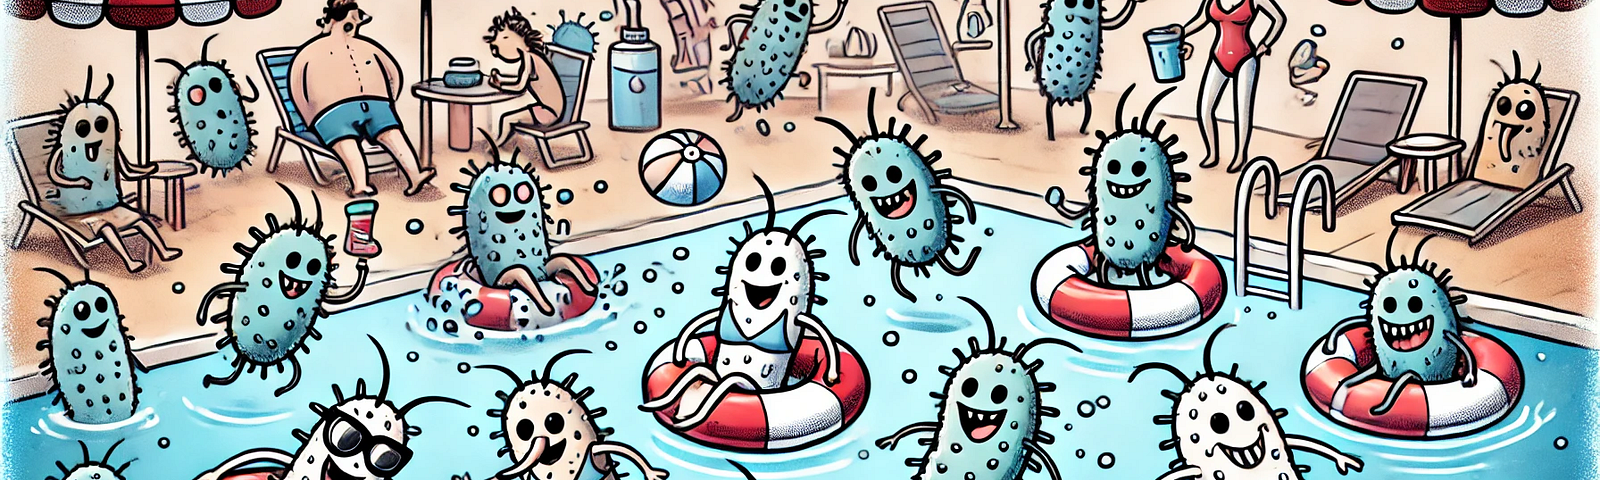 Cartoon of Cryptosporidium parasites having fun in a swimming pool. The parasites are depicted with playful expressions, engaging in activities like swimming, diving, and lounging on floaties. The scene is lively with water splashes, pool toys, and a fun atmosphere, drawn in a light-hearted and humorous newspaper cartoon style.